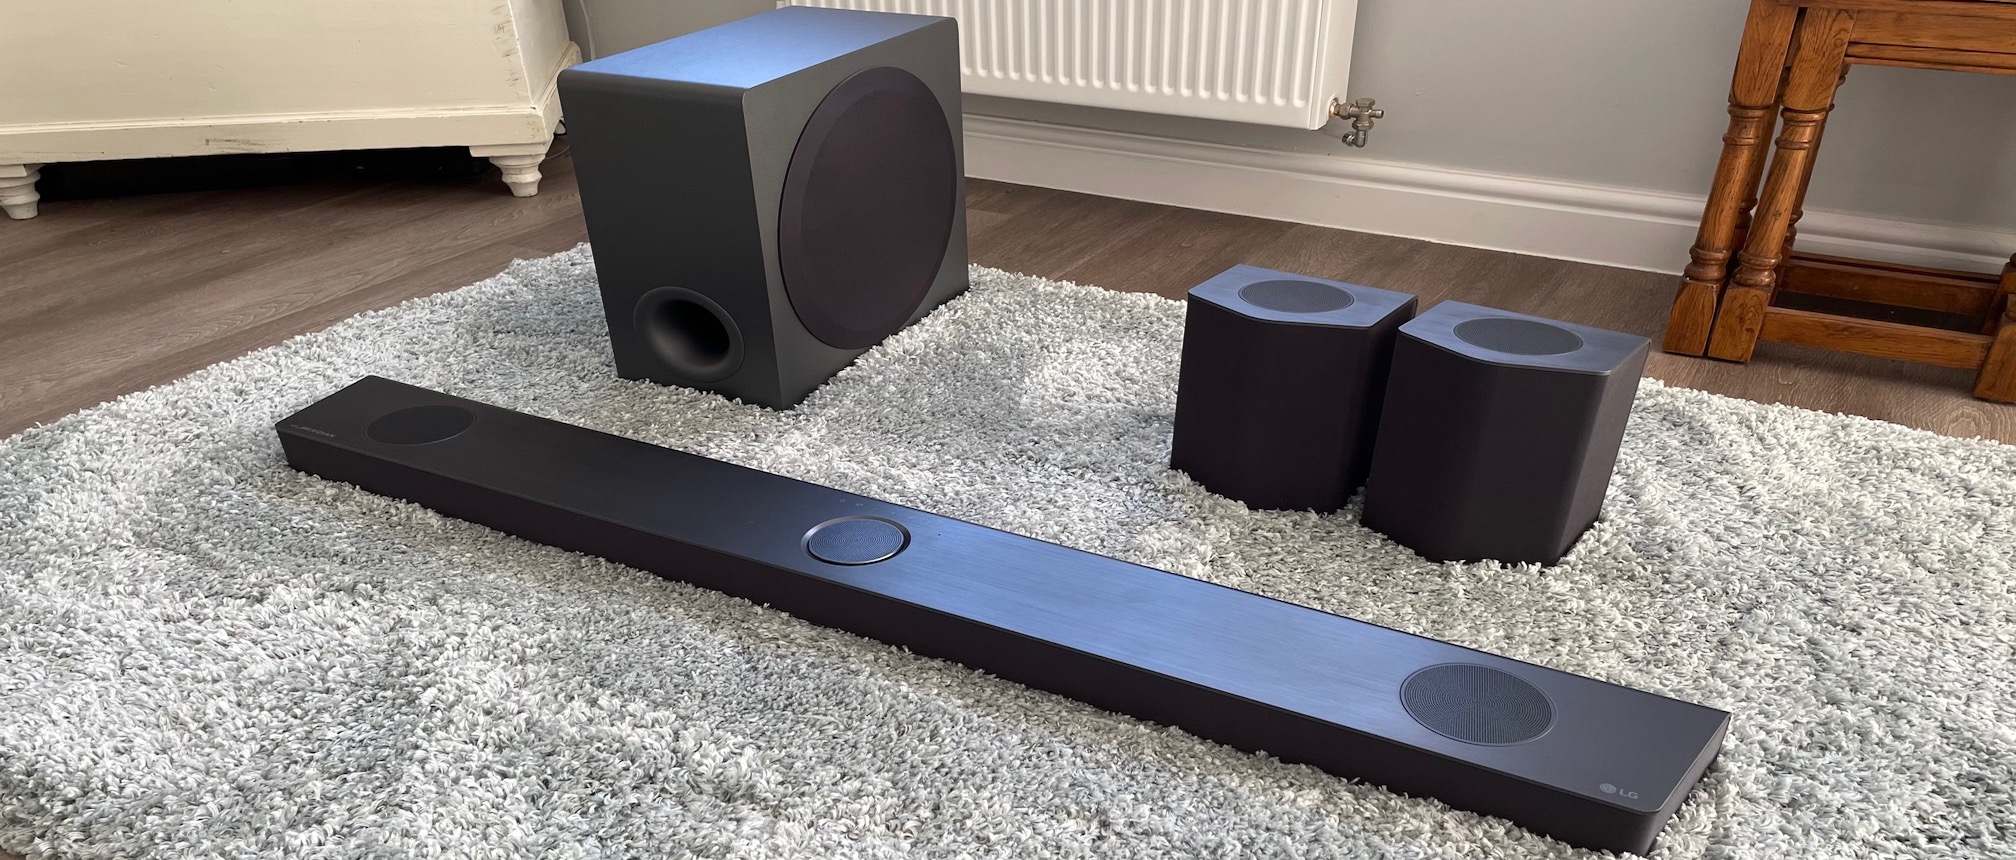 LG S95QR review: a cinematic soundbar package with generous features